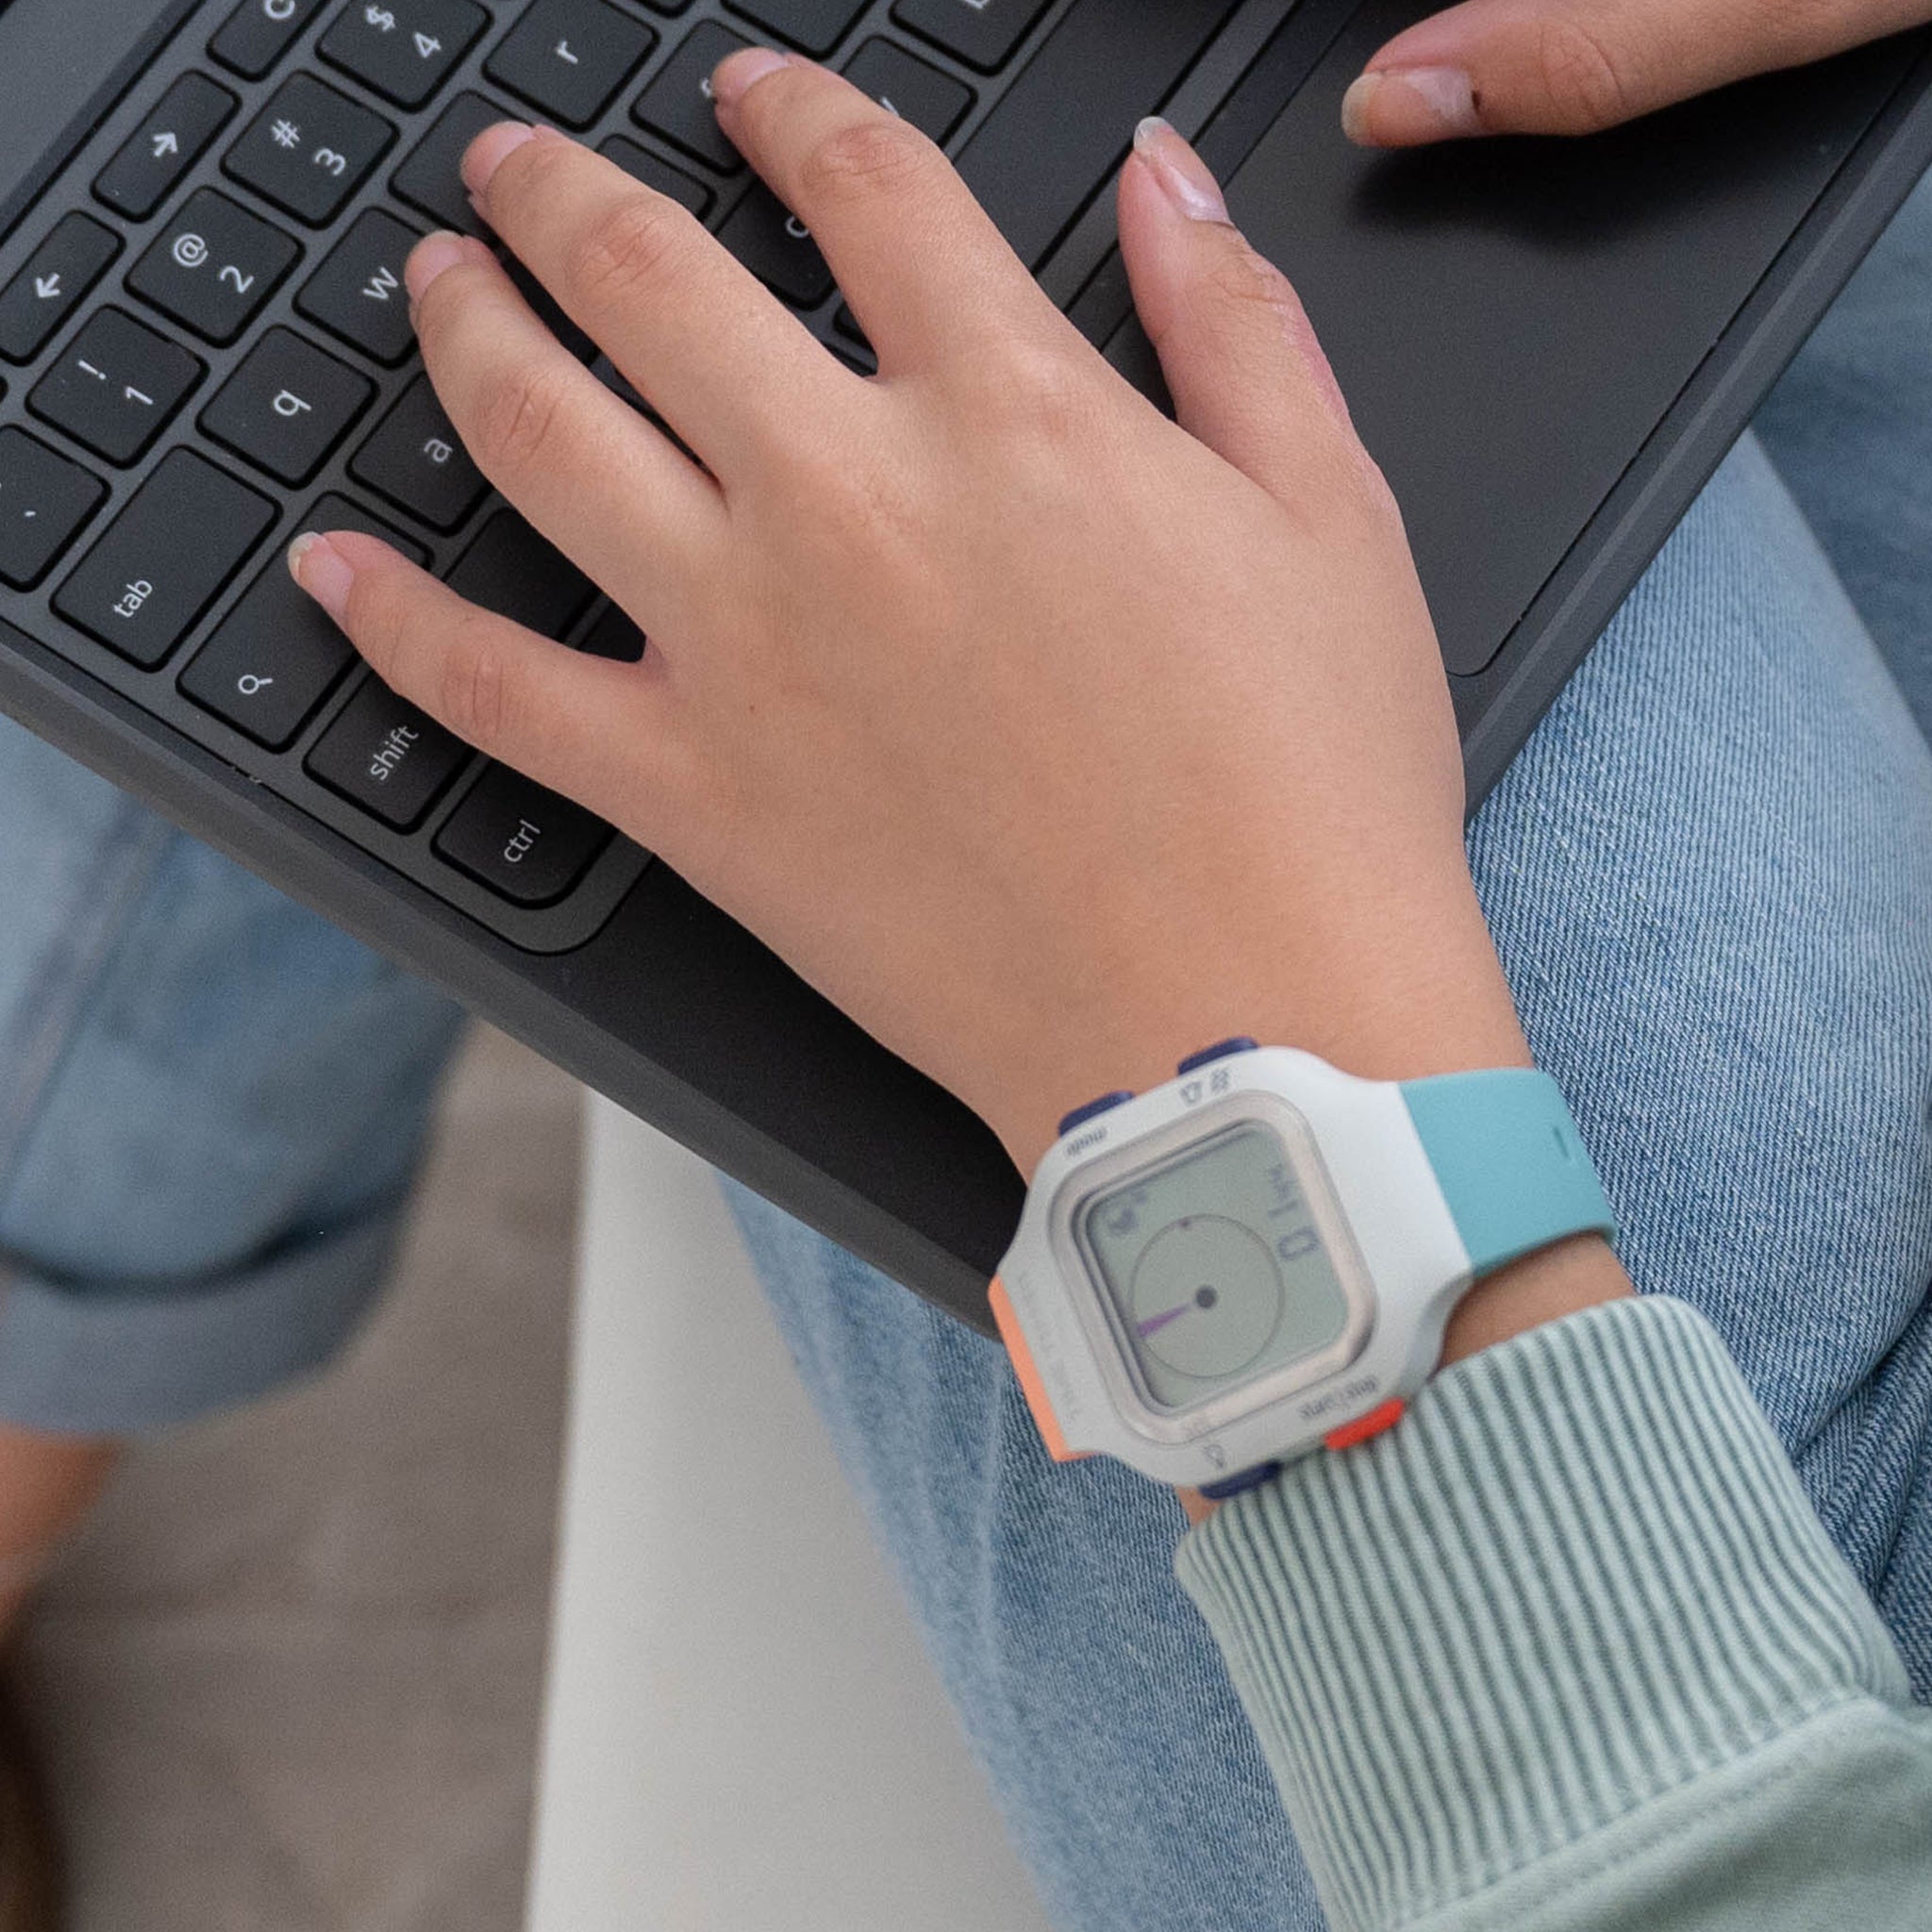 A young woman's hand is shown typing on a laptop. On her wrist is the Time Timer Watch. The watch face is the standard Arctic White option, and she has paired it with two different band colors - on top is the Sedona Orange band, on the bottom is the Caribbean blue band.  